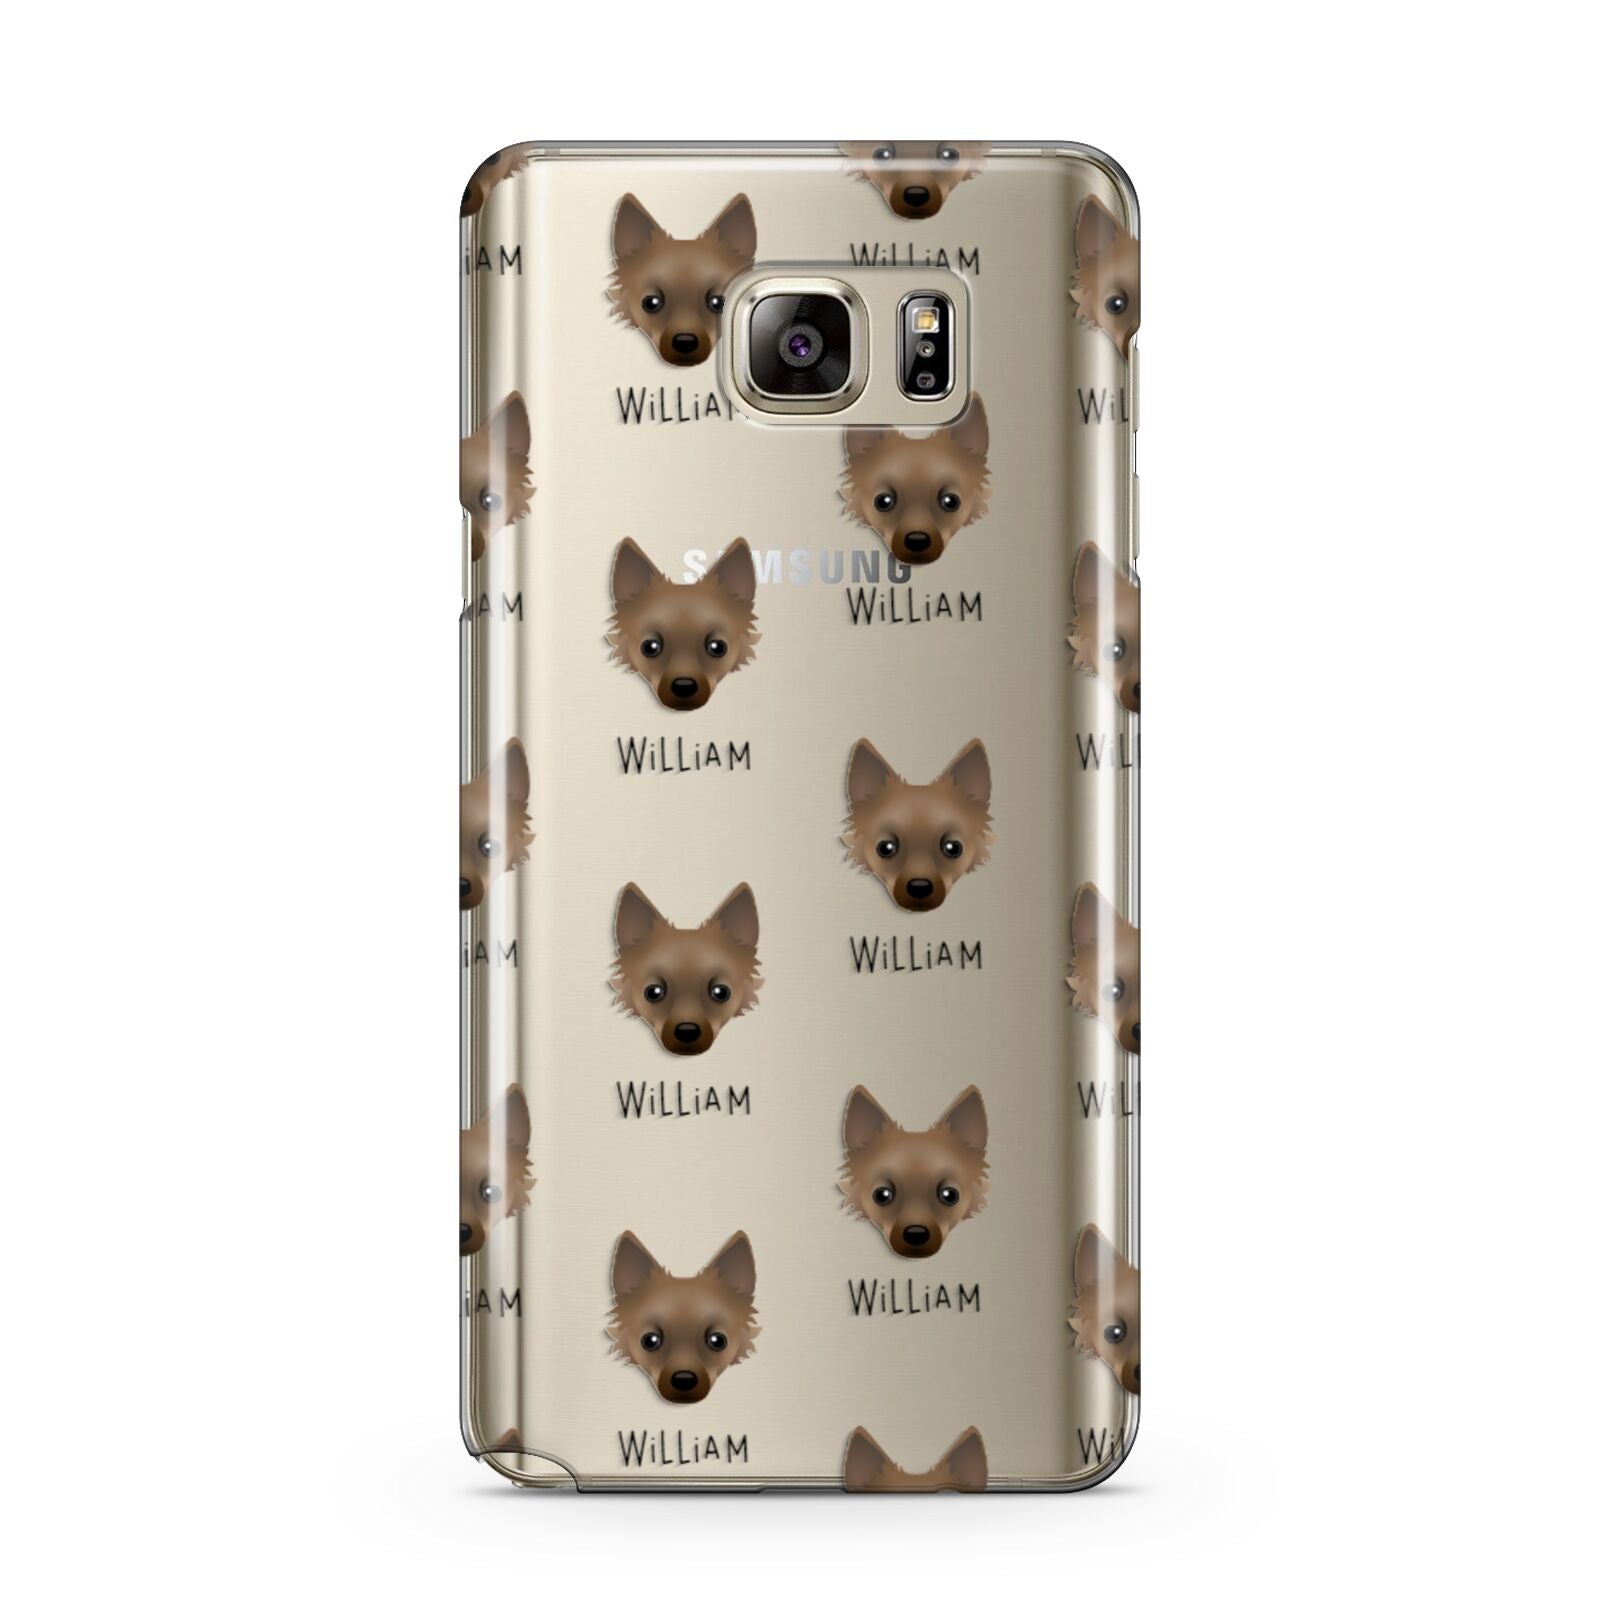 Jackahuahua Icon with Name Samsung Galaxy Note 5 Case